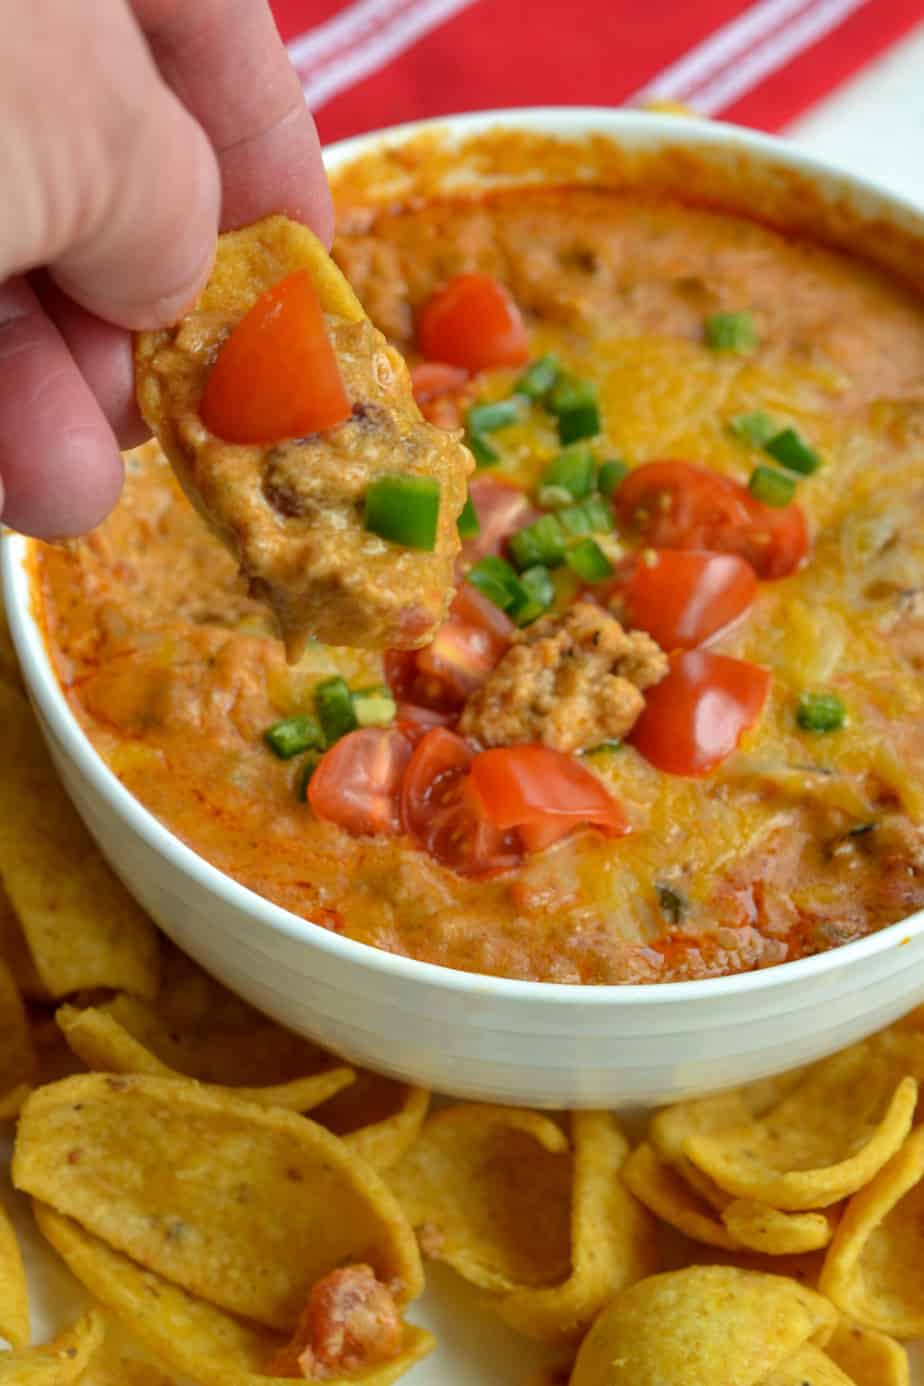 Real Chili Cheese Dip | Small Town Woman